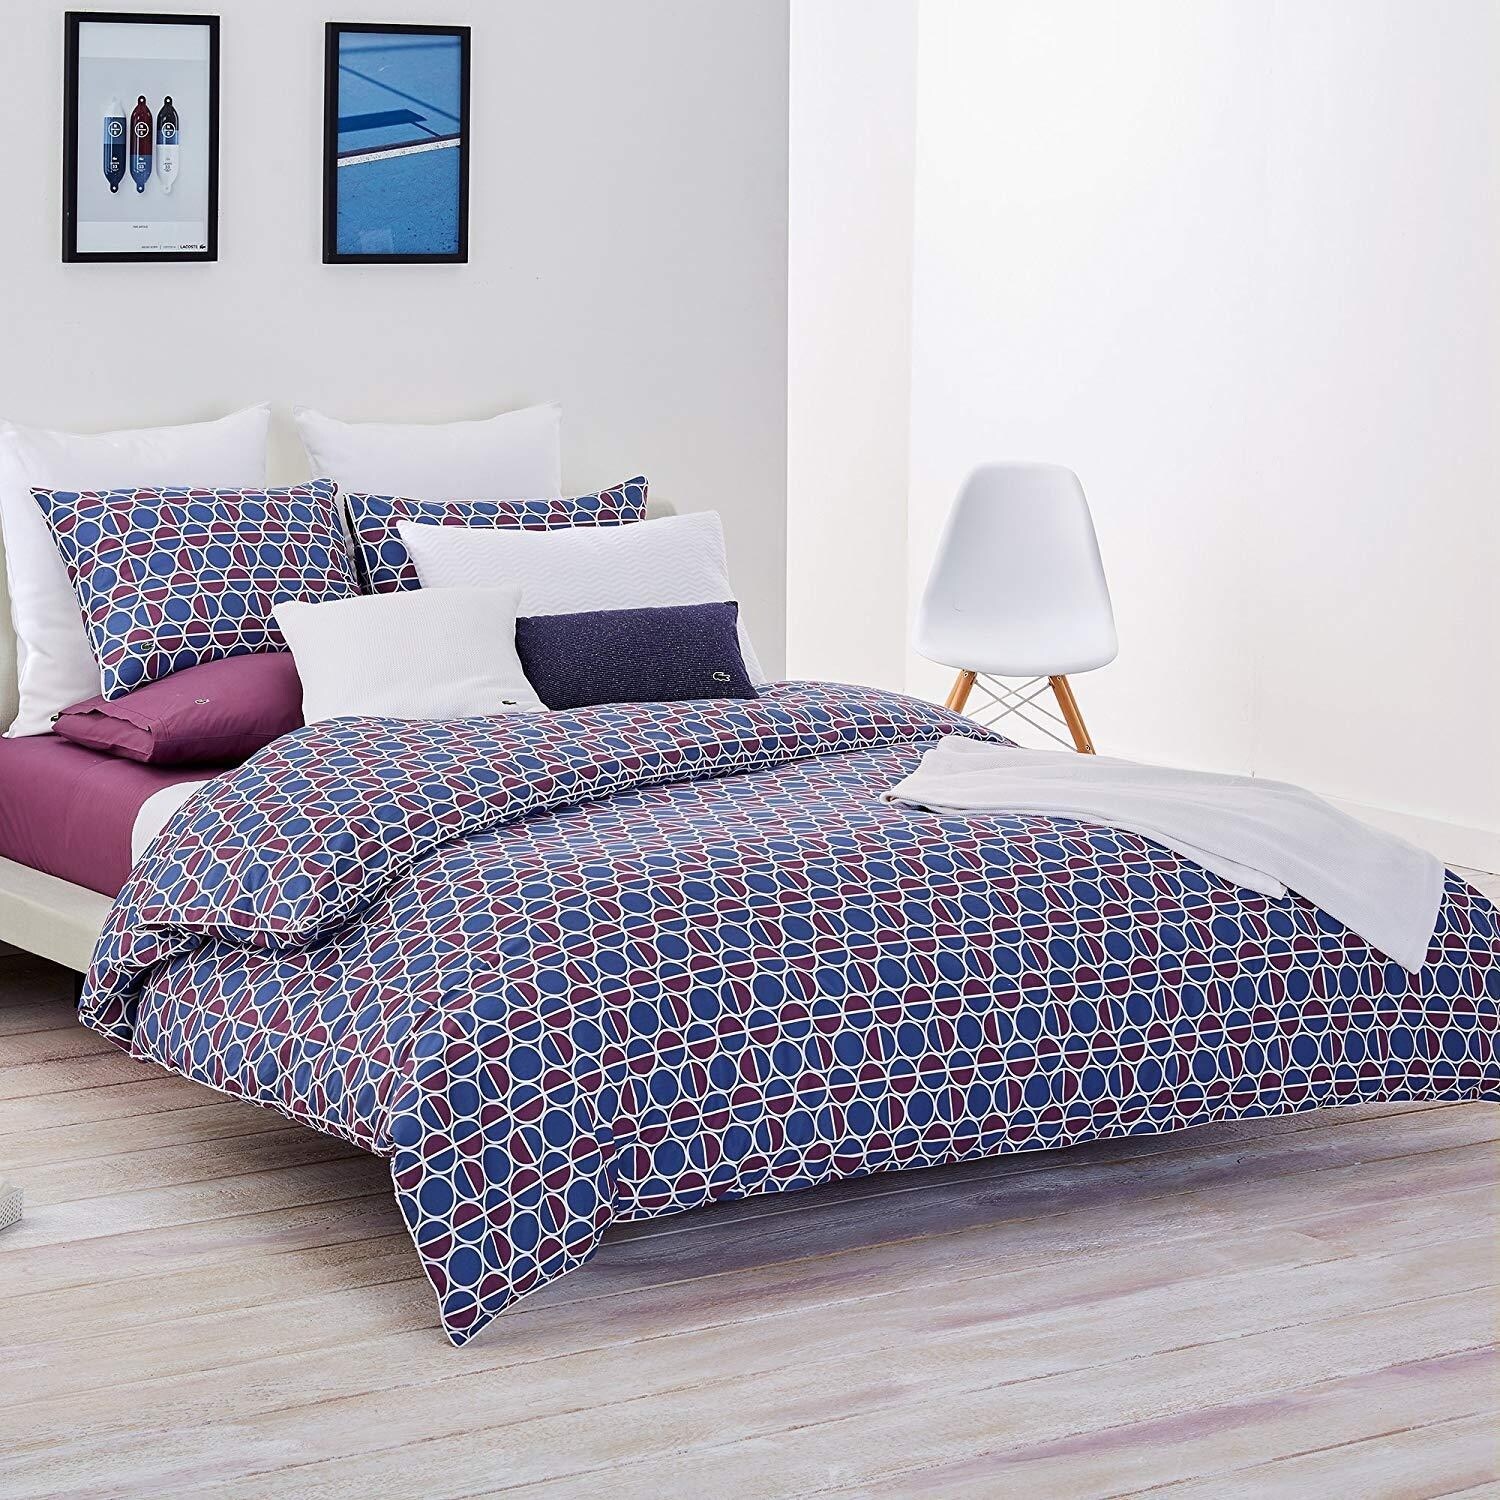 https://ak1.ostkcdn.com/images/products/is/images/direct/79d8449f73d92dc6312857ba0cfa13d066857faa/Lacoste-Washed-Solid-Duvet-Set.jpg